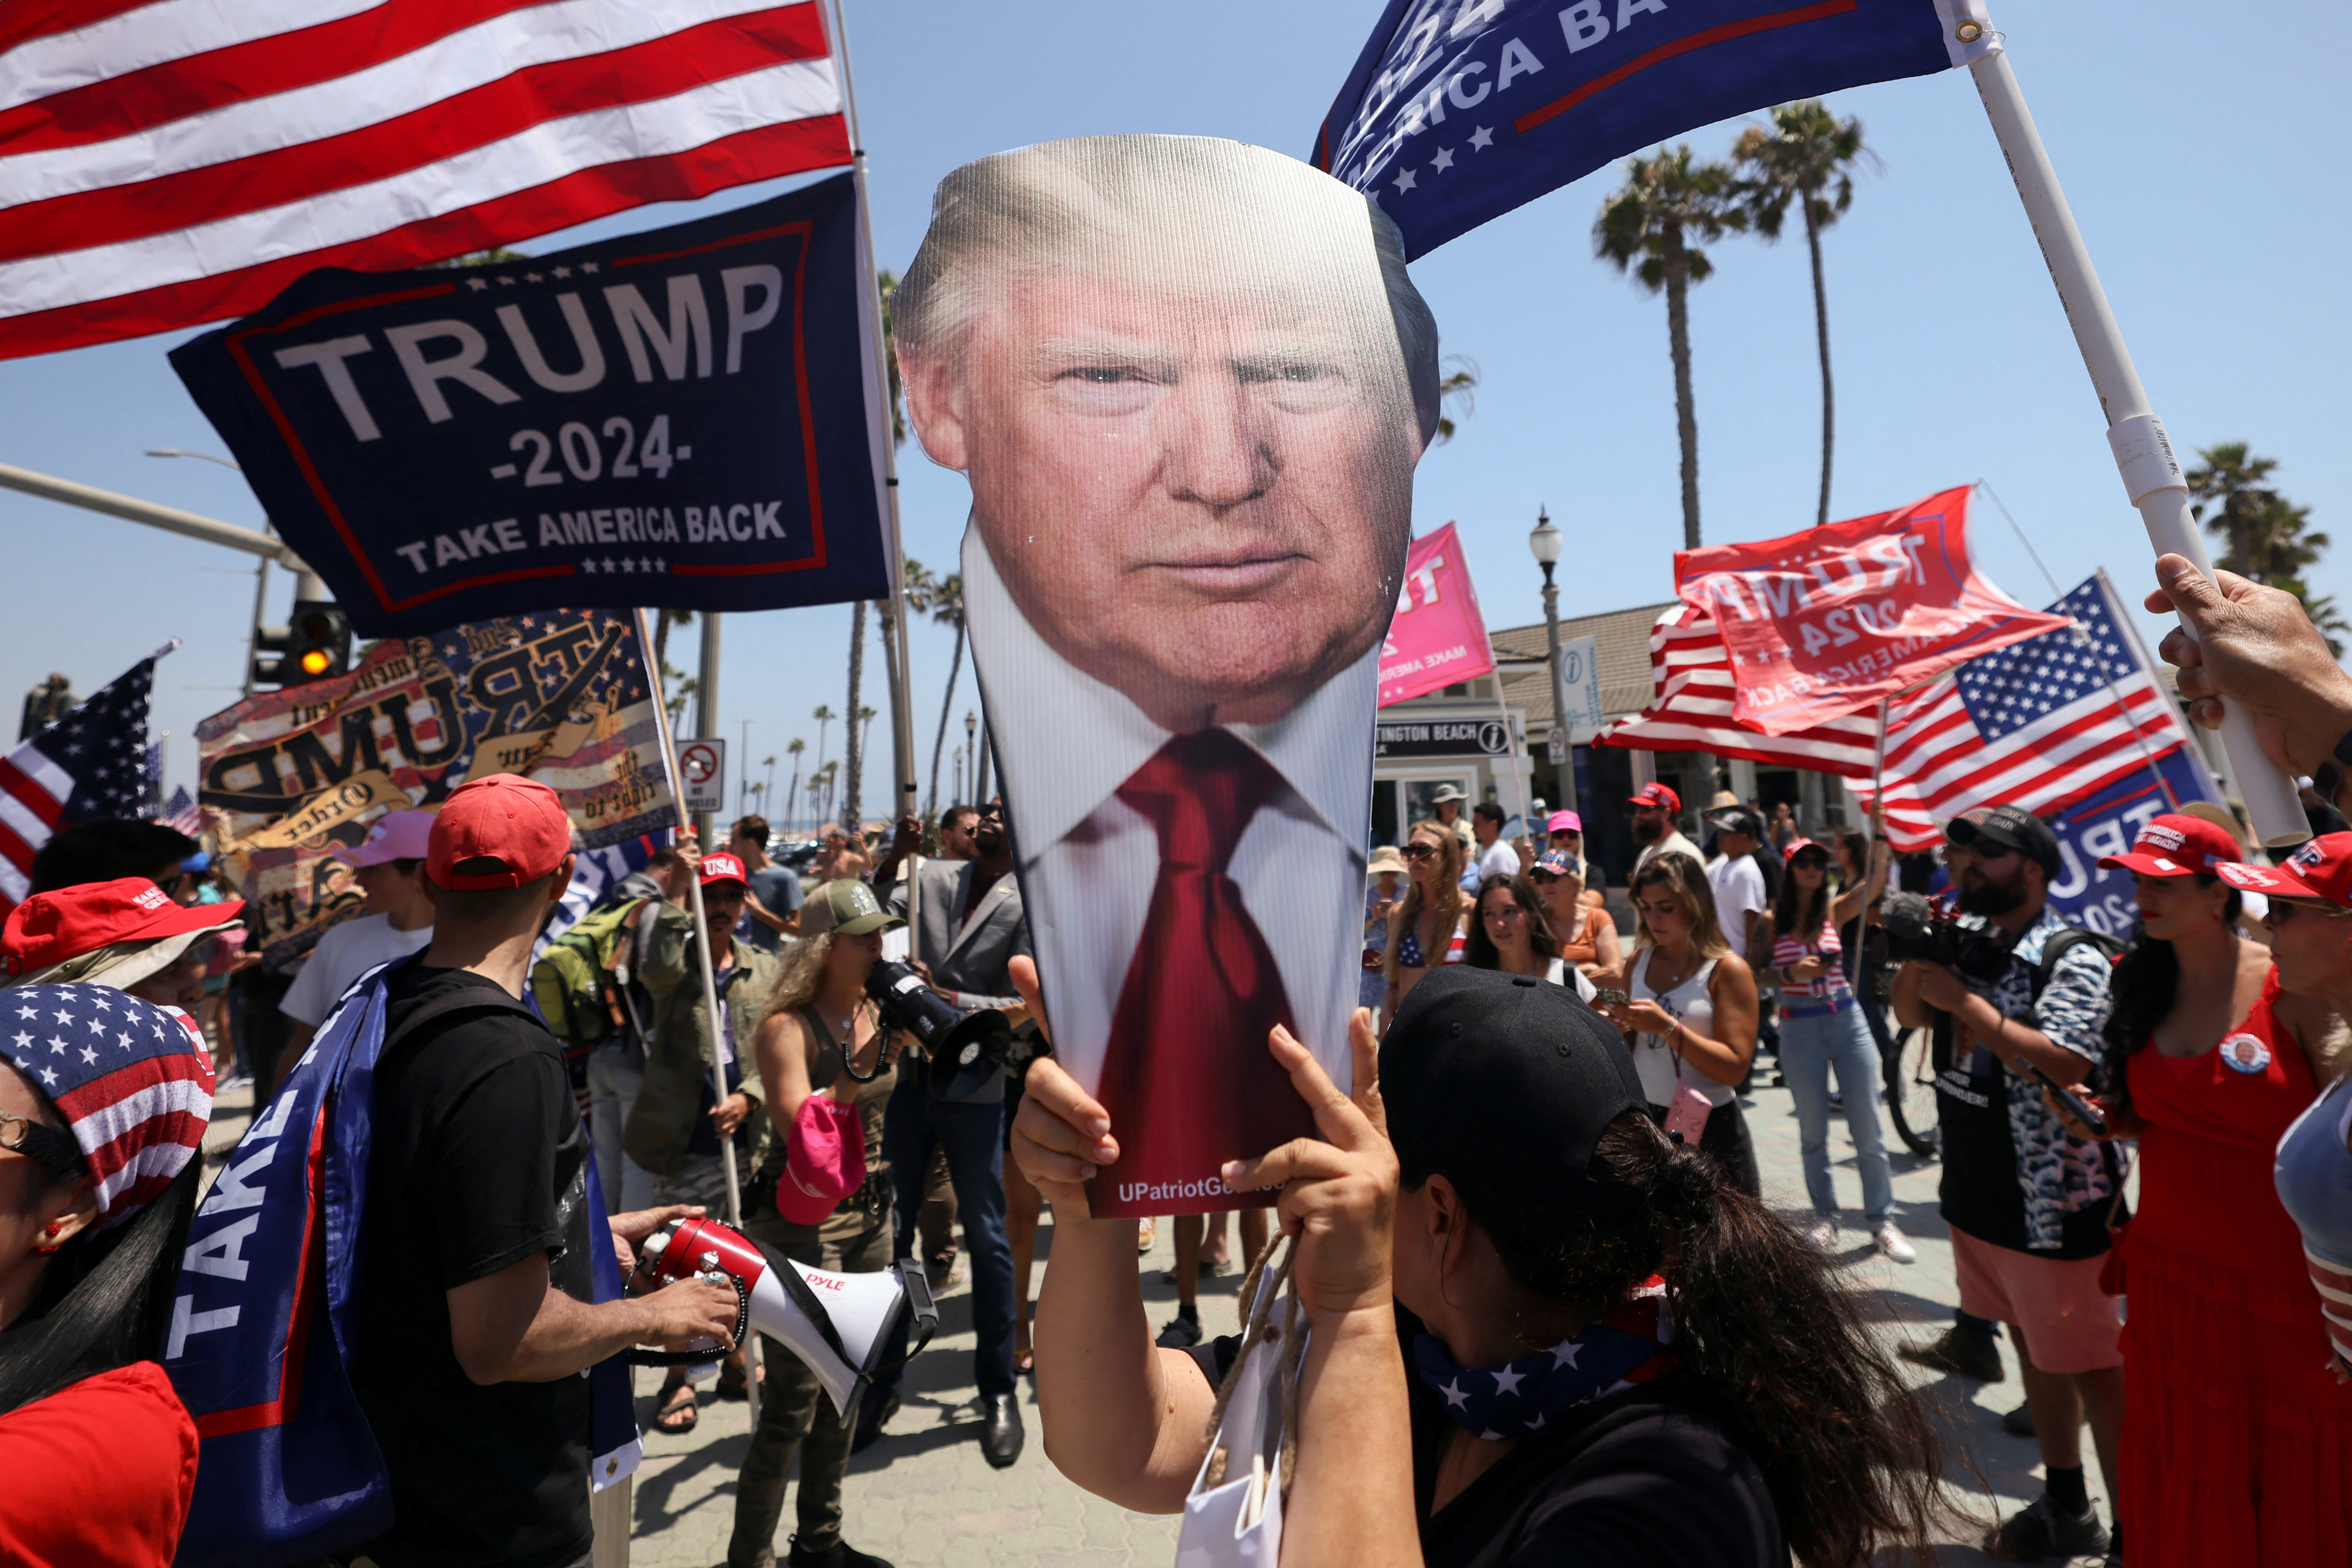 Demonstration in support of former U.S. President Donald Trump, in Huntington Beach